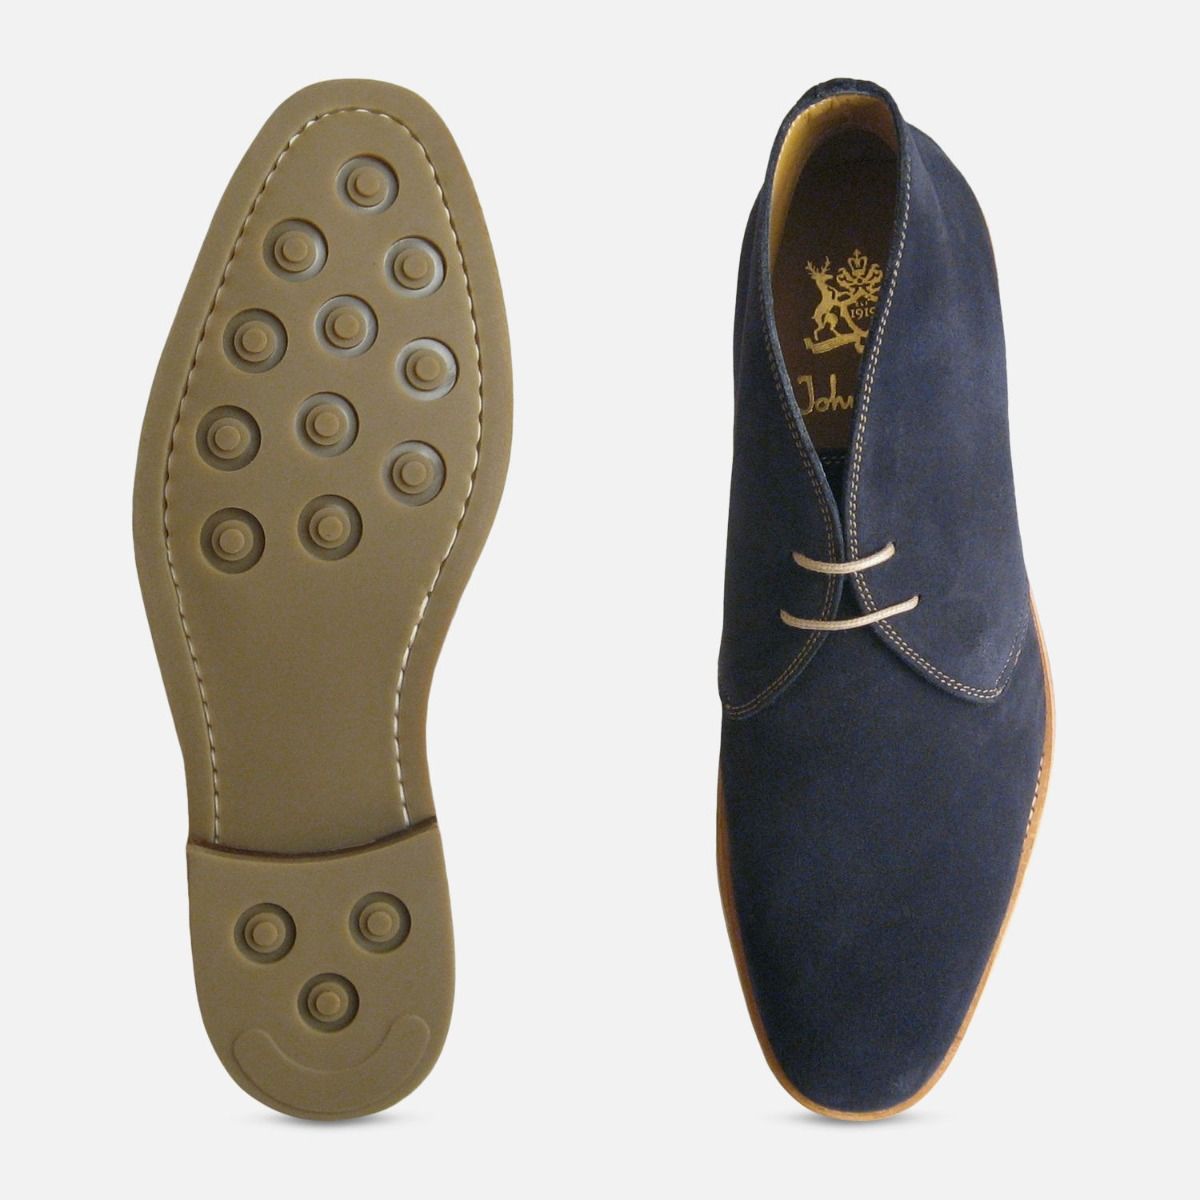 mens navy suede chukka boots